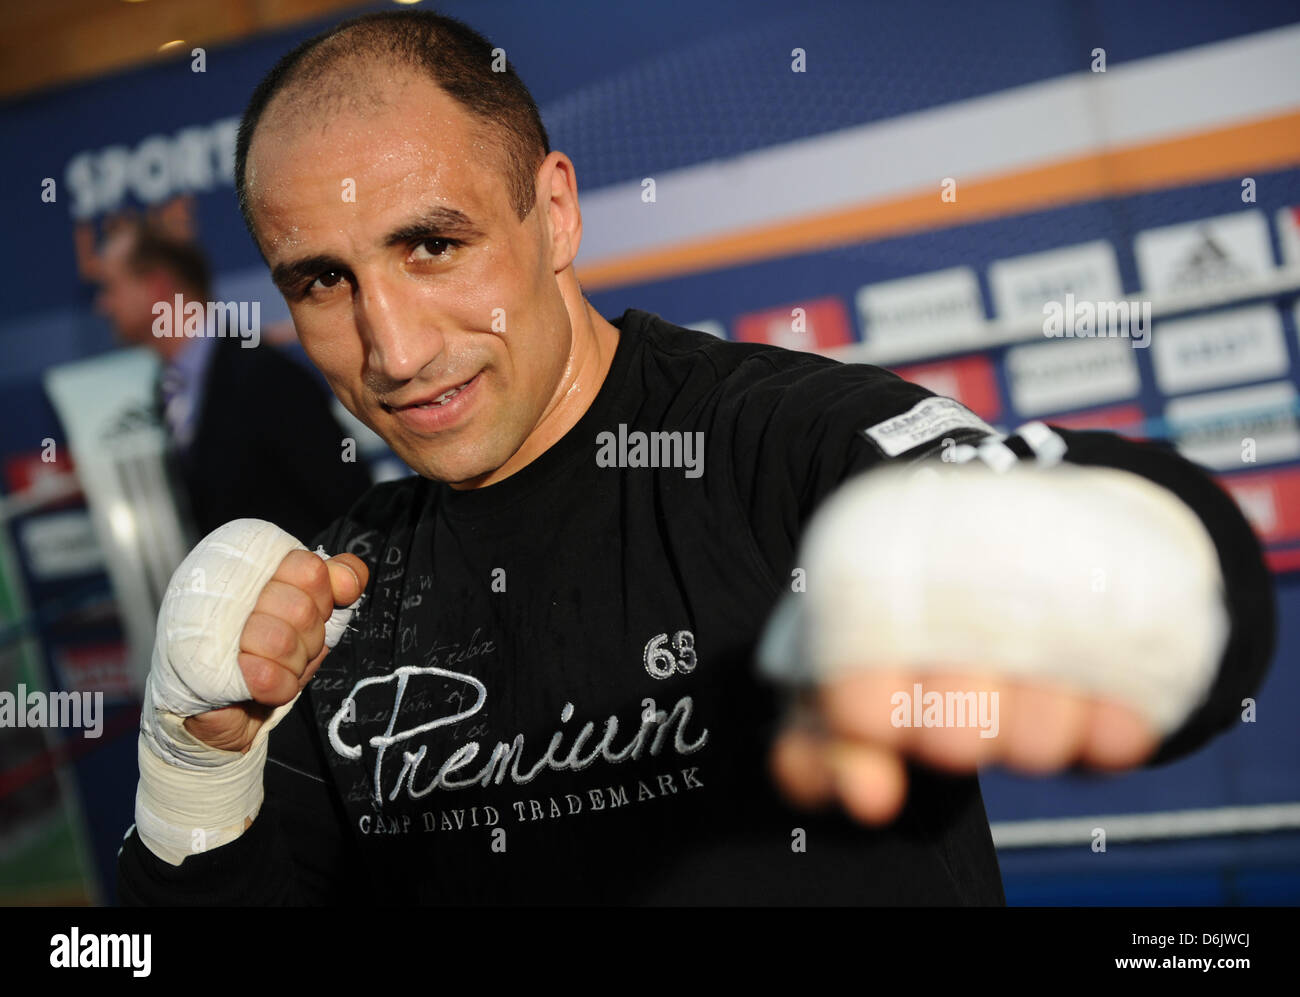 Boxer Arthur Abraham poses during a press training at a shopping center in Kiel, Germany, 27 March 2012. Abraham will fight Polish boxer Wilczewski in the super middleweight division. Previous IBF middleweight world champion Abraham wants to come closer to the top of boxing again with this fight. Photo: CHRISTIAN CHARISIUS Stock Photo